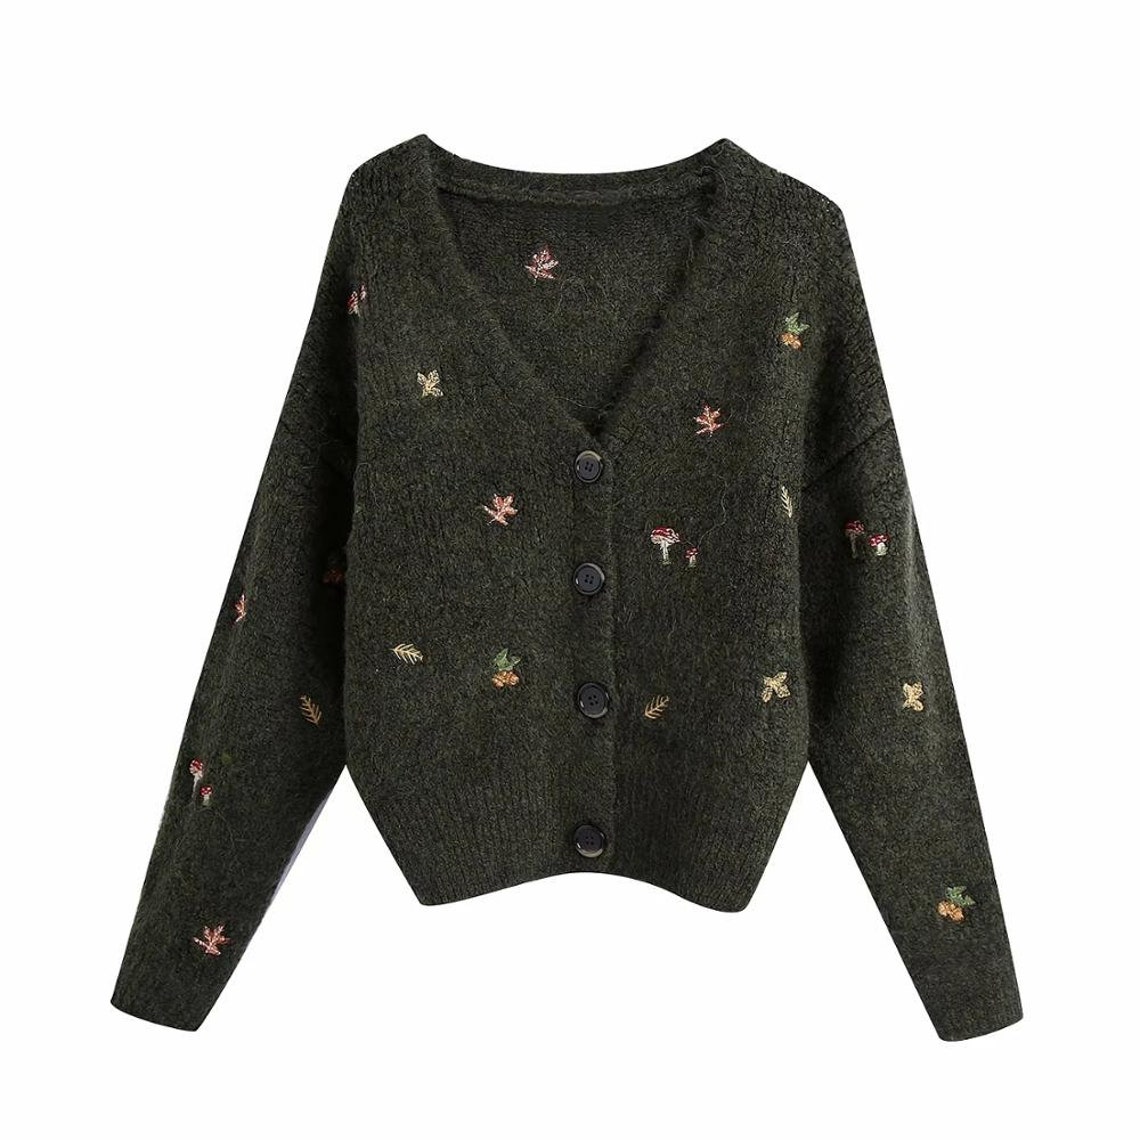 Embroidered Forest Cardigan | Embroidered Leaves Cardigan | Embroidered Cardigan | Harajuku Cardigan | V Neck Womens Cardigan